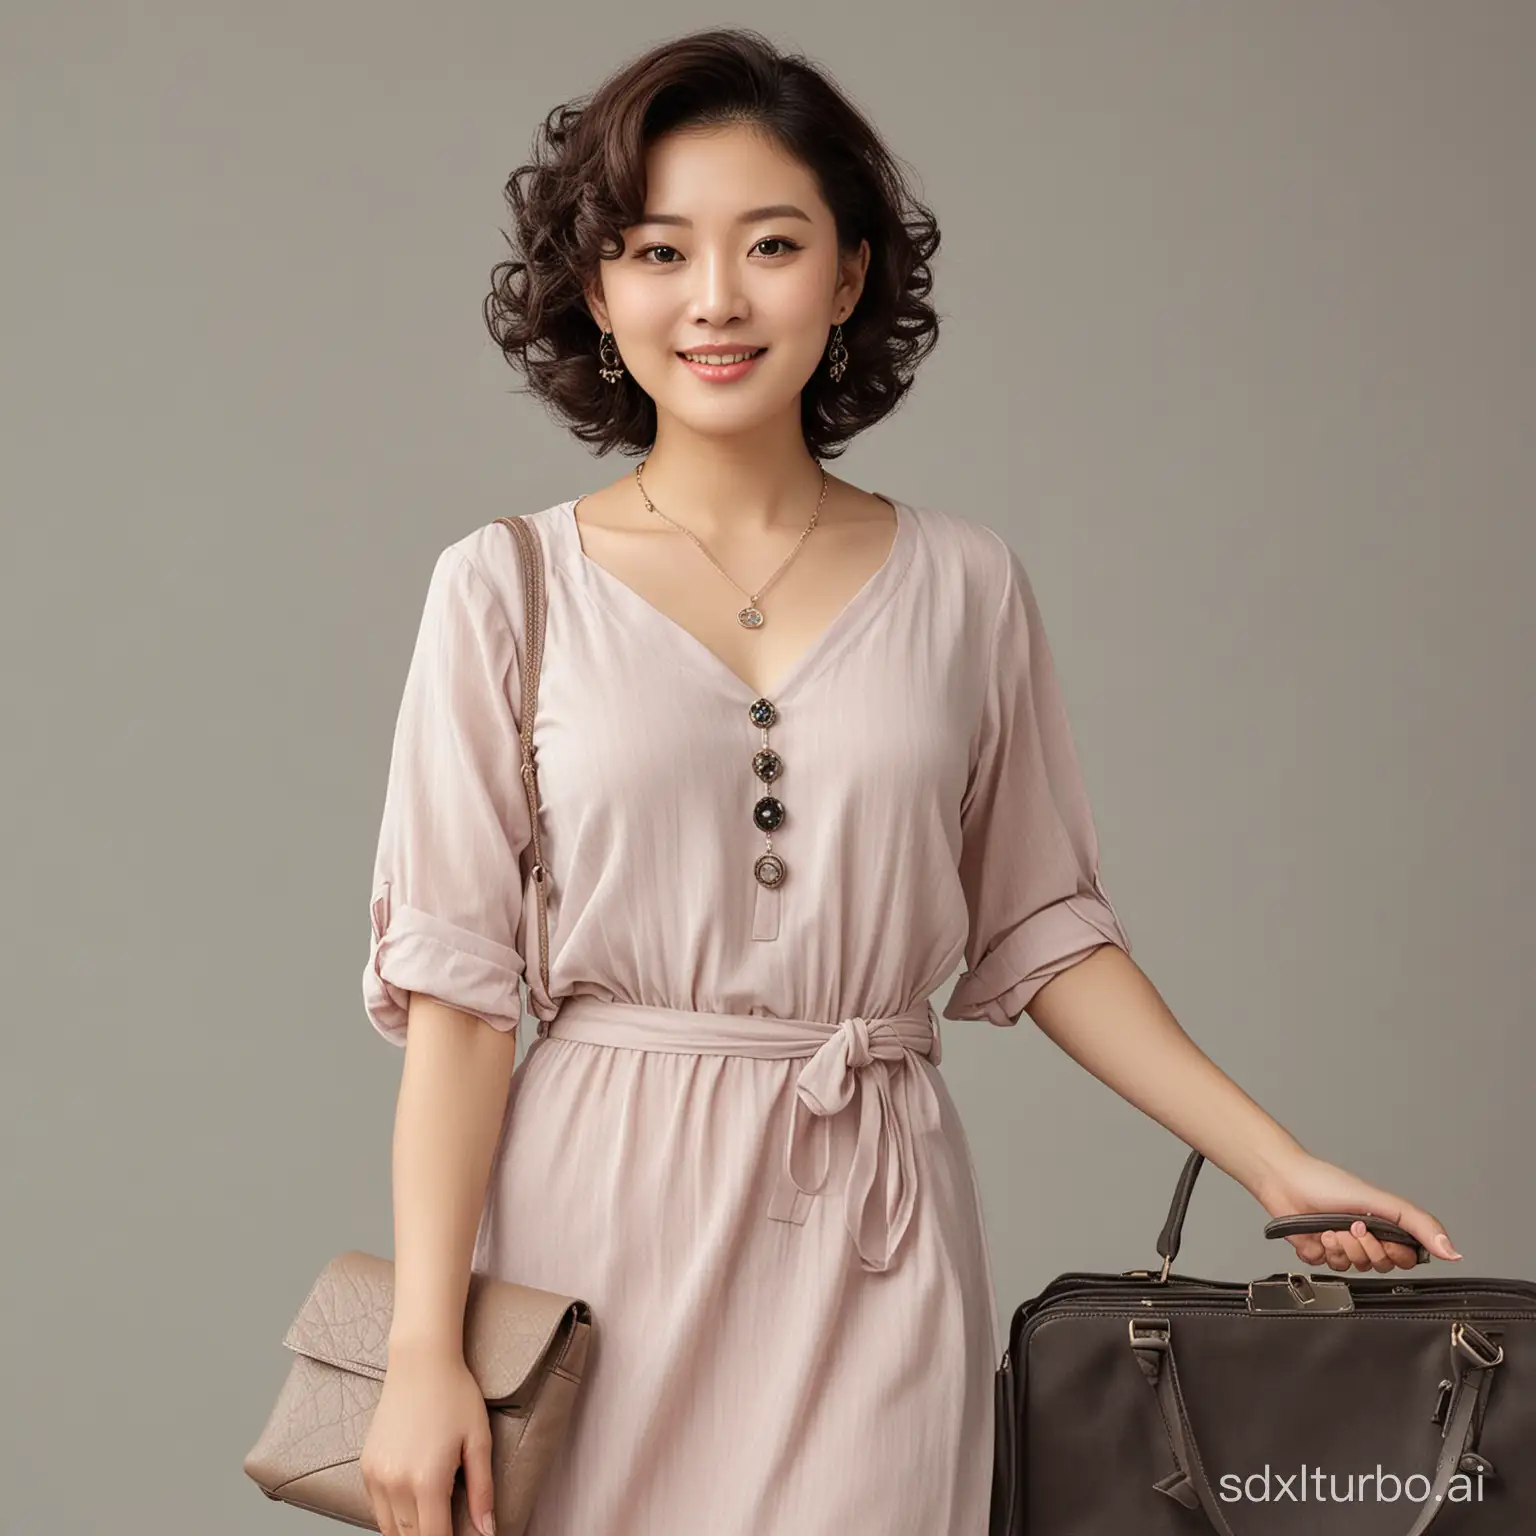 Chinese women around 35 years old, plump and elegant, with curly hair, wearing a casual dress, necklace, watch, and handbag.